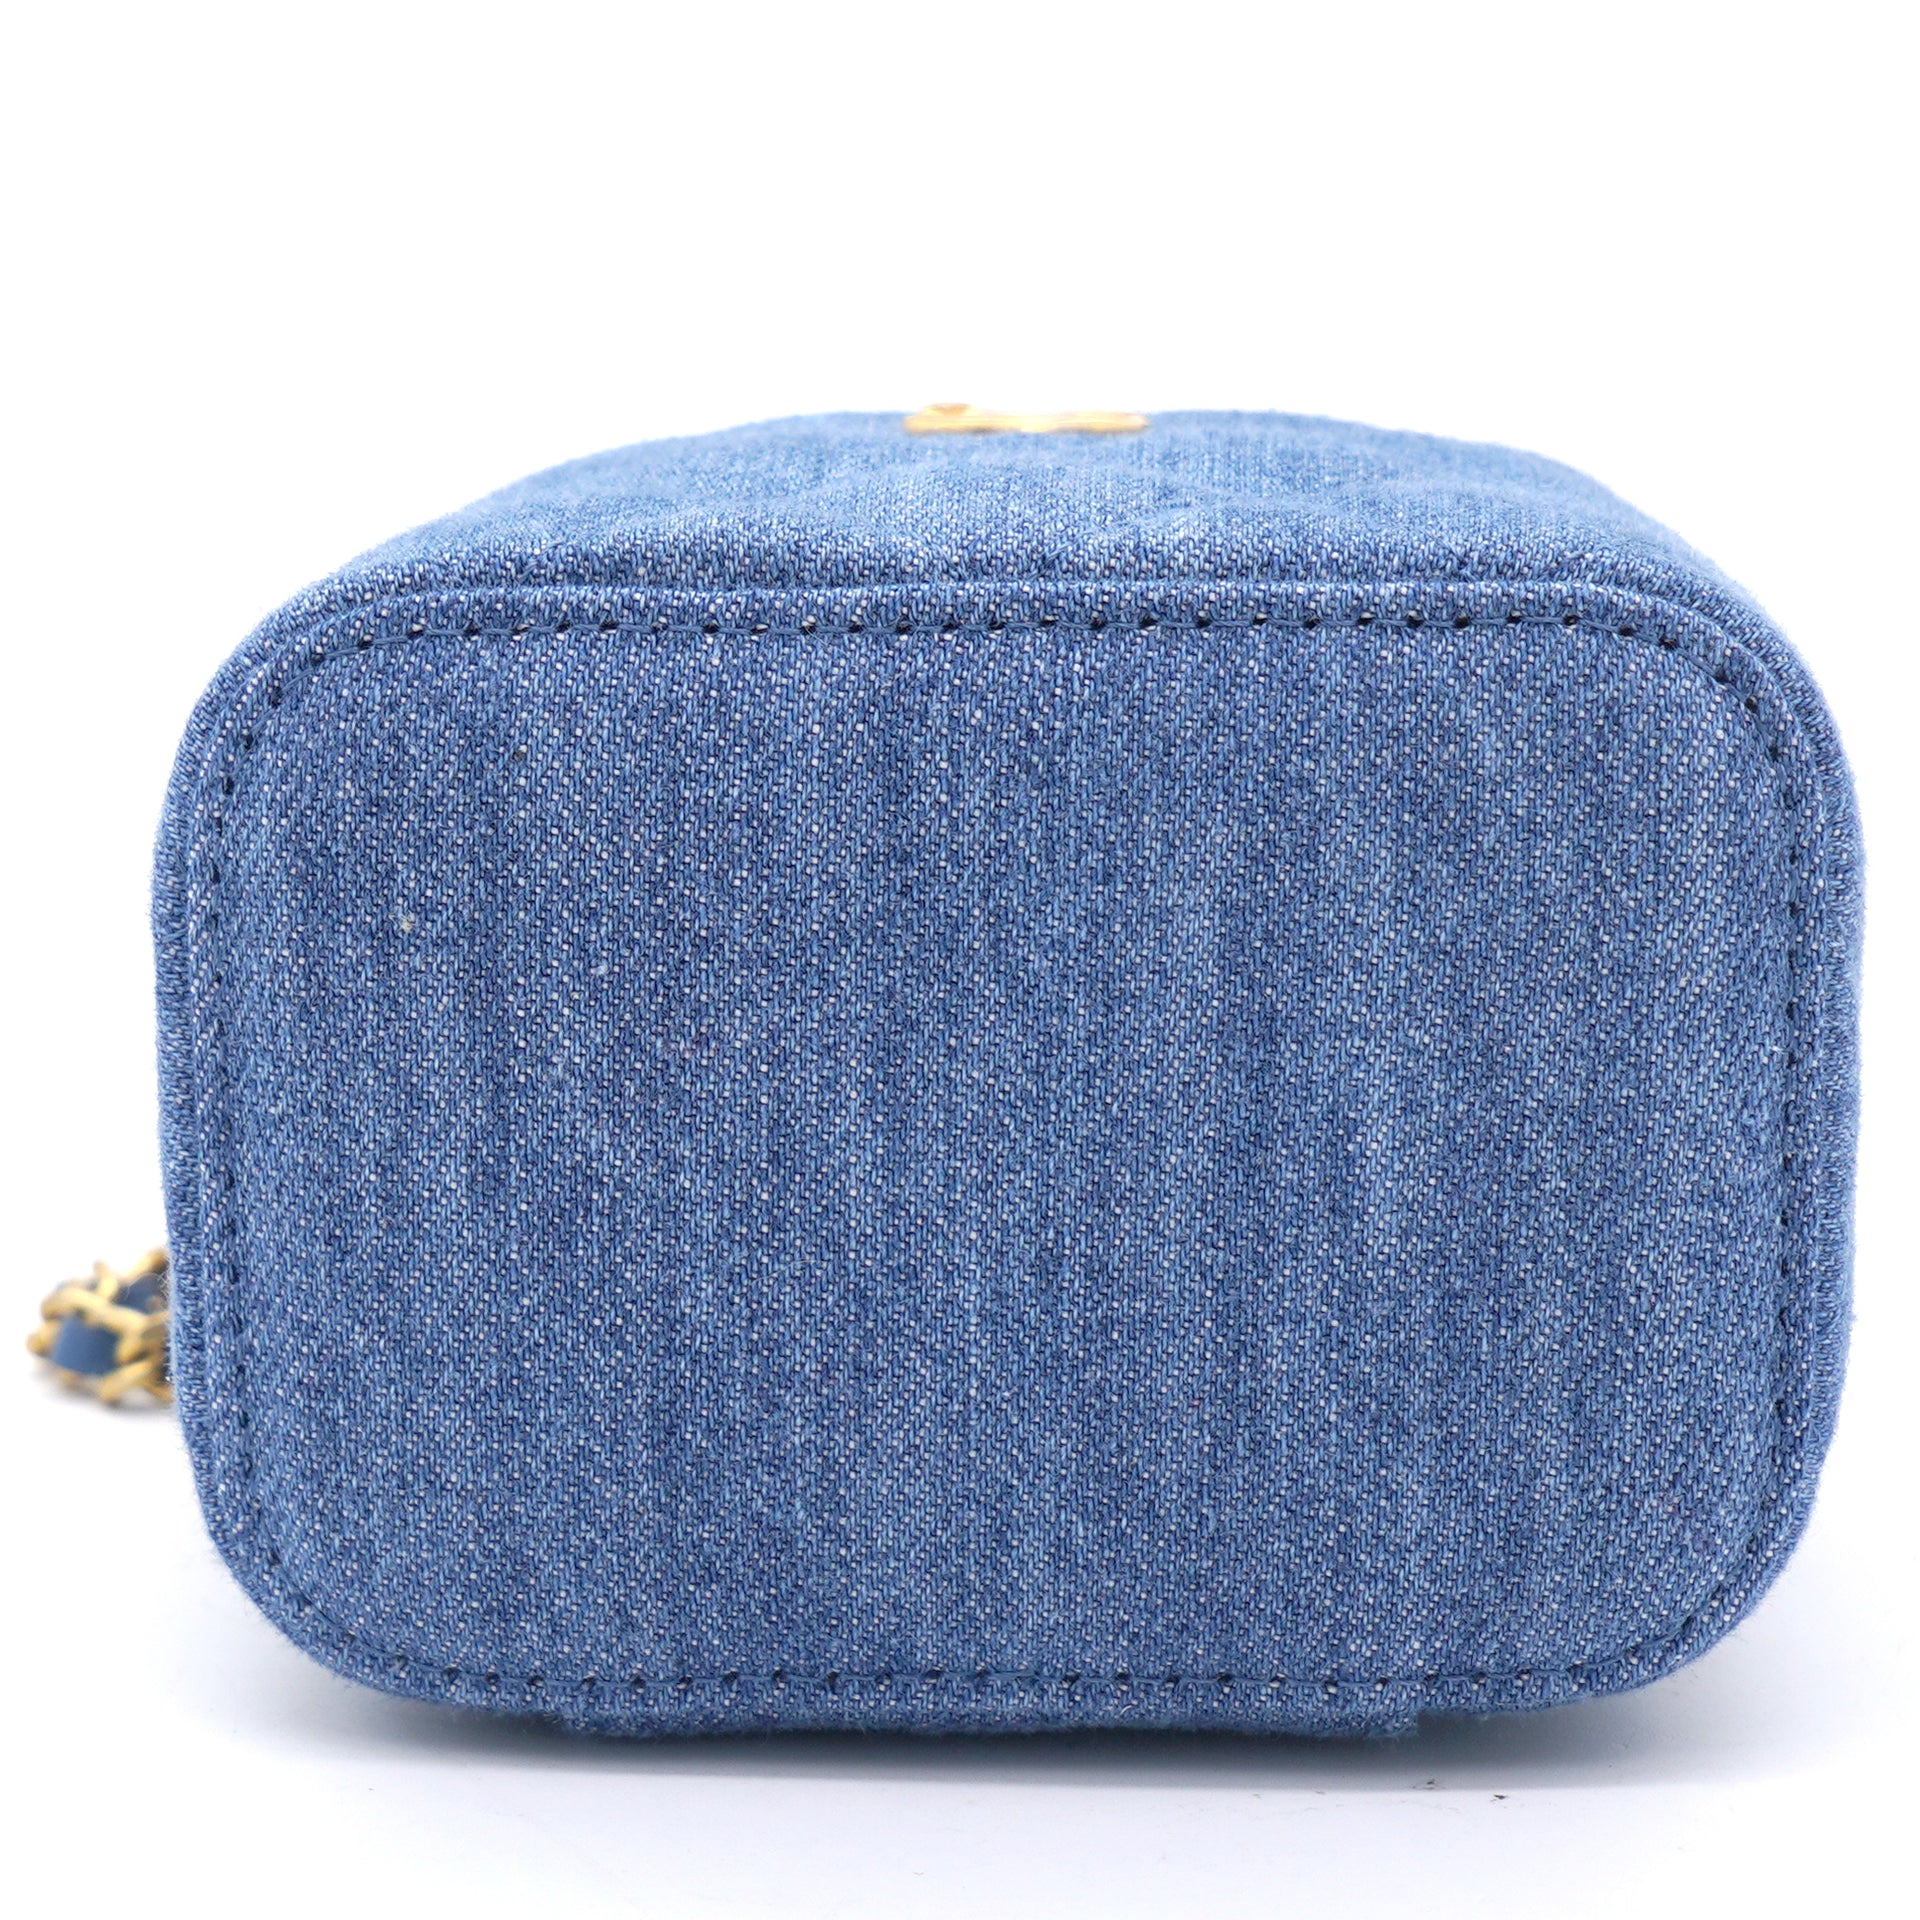 Denim Quilted Small Coco Beauty Vanity Case Pearl Crush